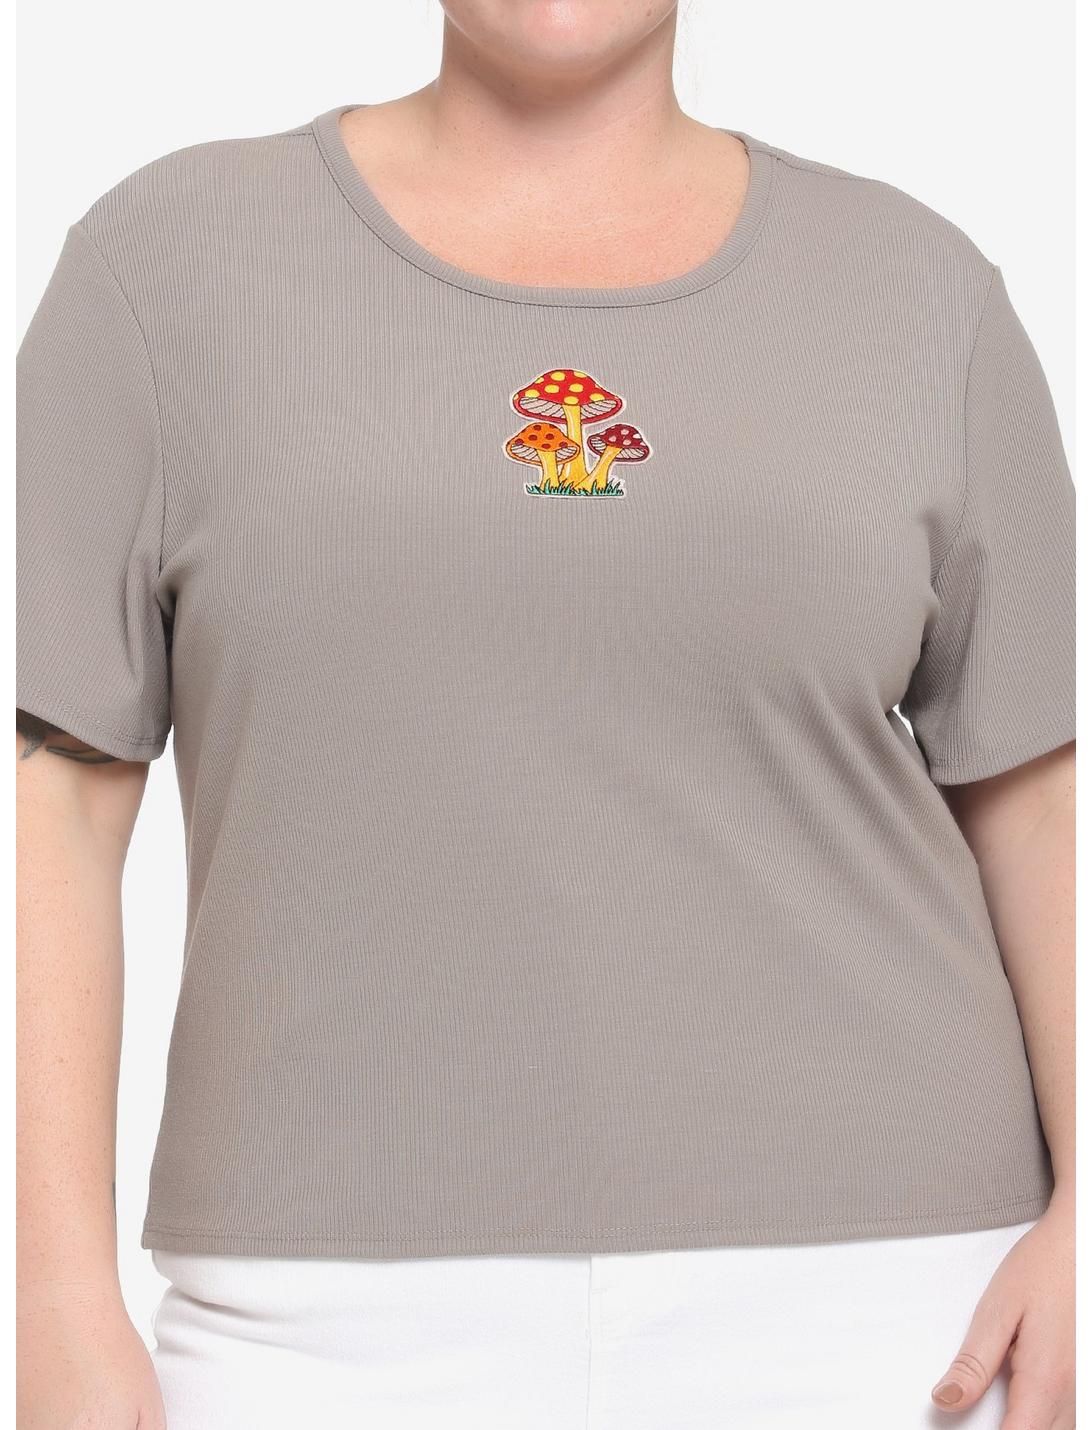 Embroidered Mushrooms Girls Baby T-Shirt Plus Size, OATMEAL, hi-res